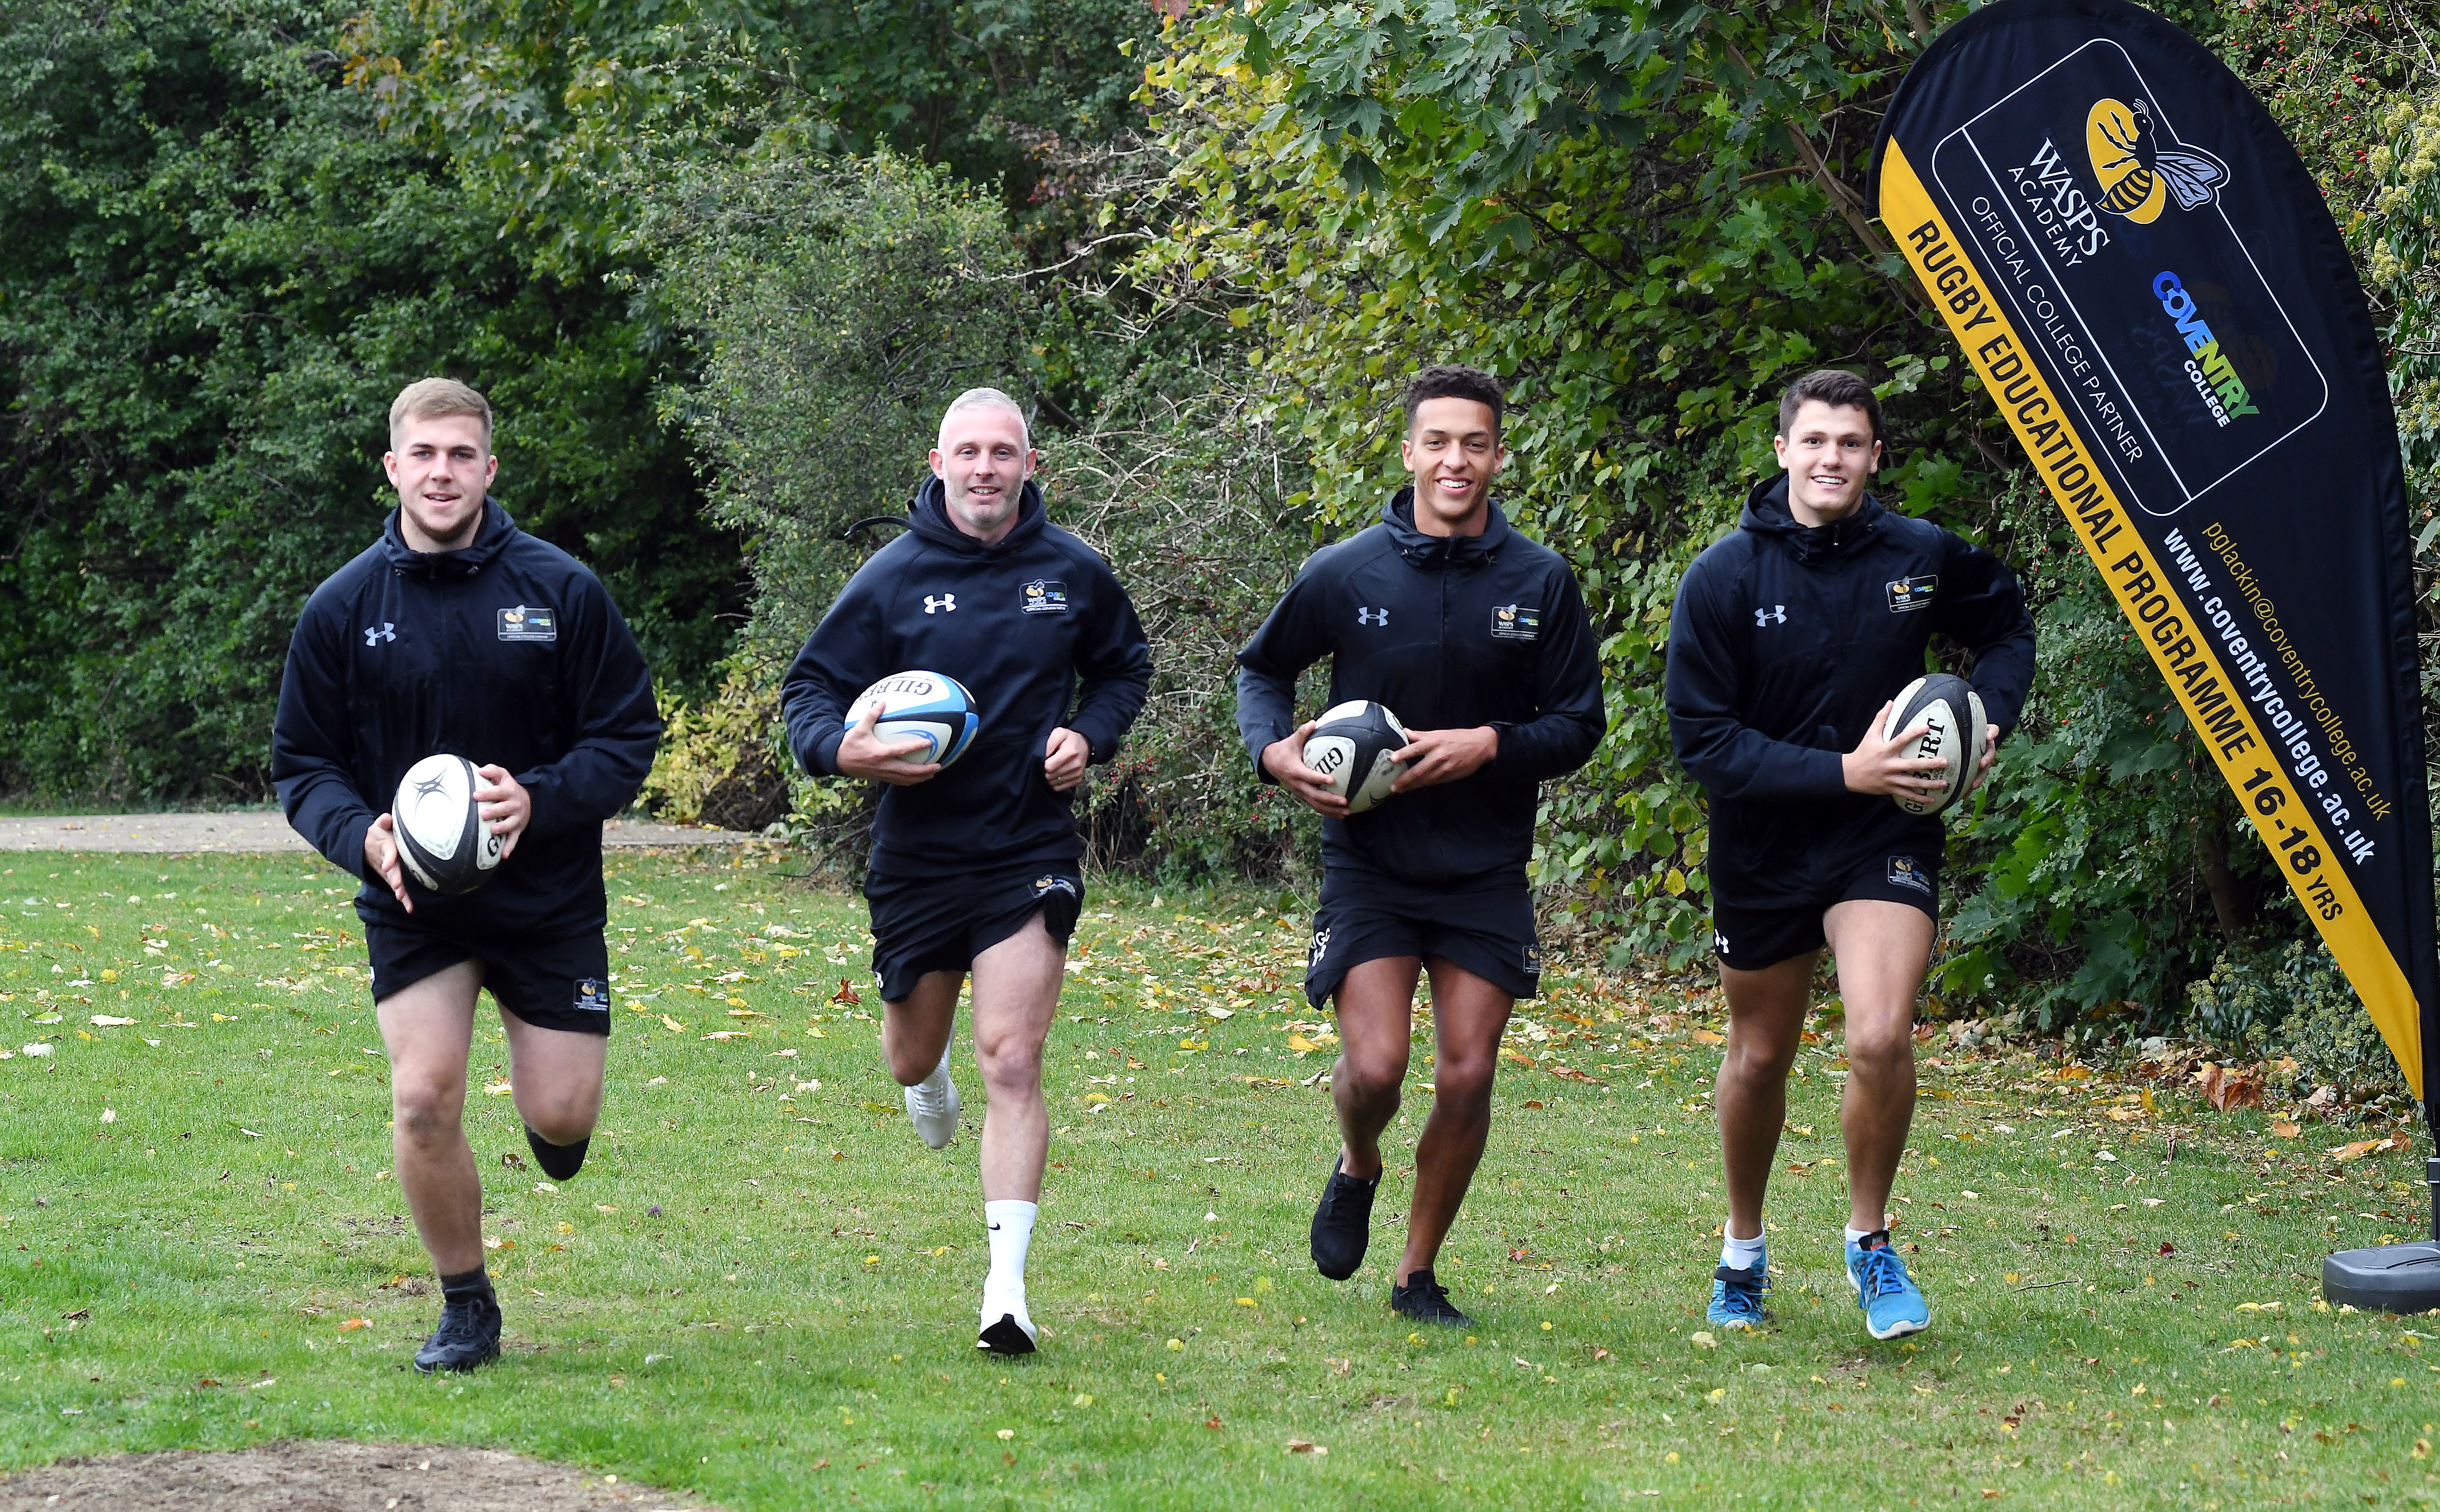 Trio of Coventry students secure place in Wasps’ youth system